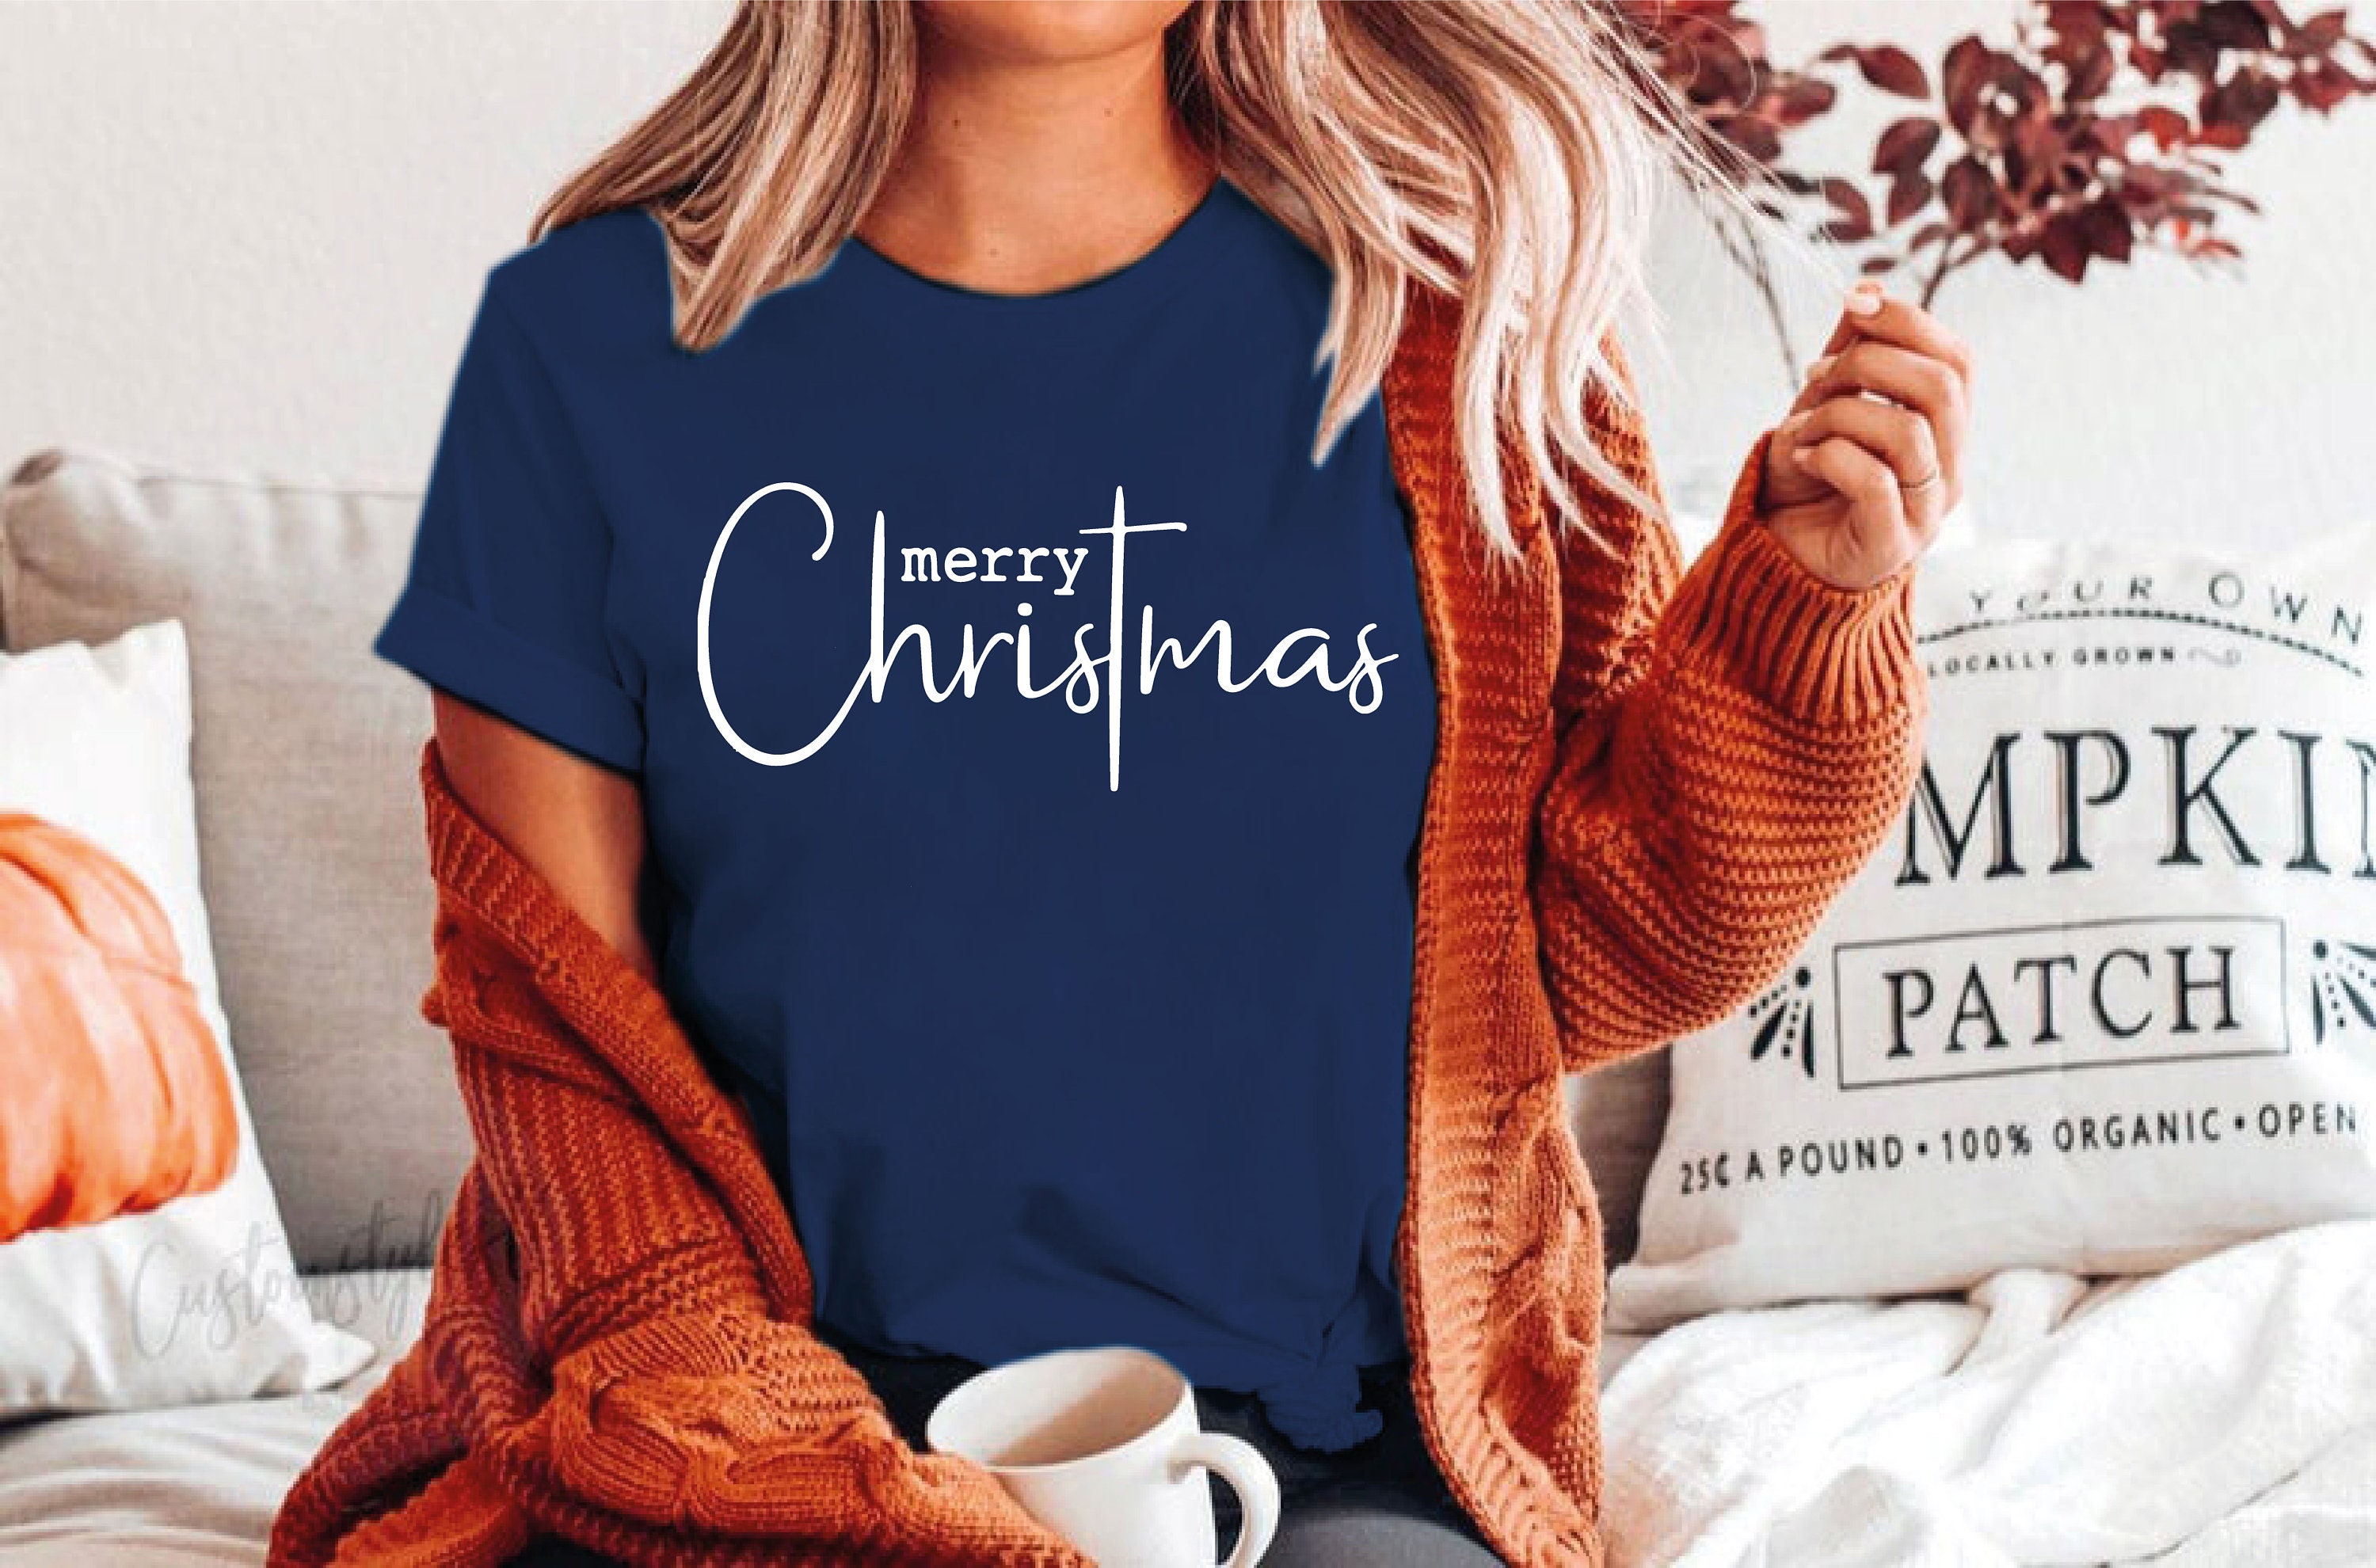 Discover Merry Christmas T shirt Reindeer Christmas T Shirt Elf outfit Elf Costume Xmas Family Holiday Gift Santa Claus, Merry Christmas Cross